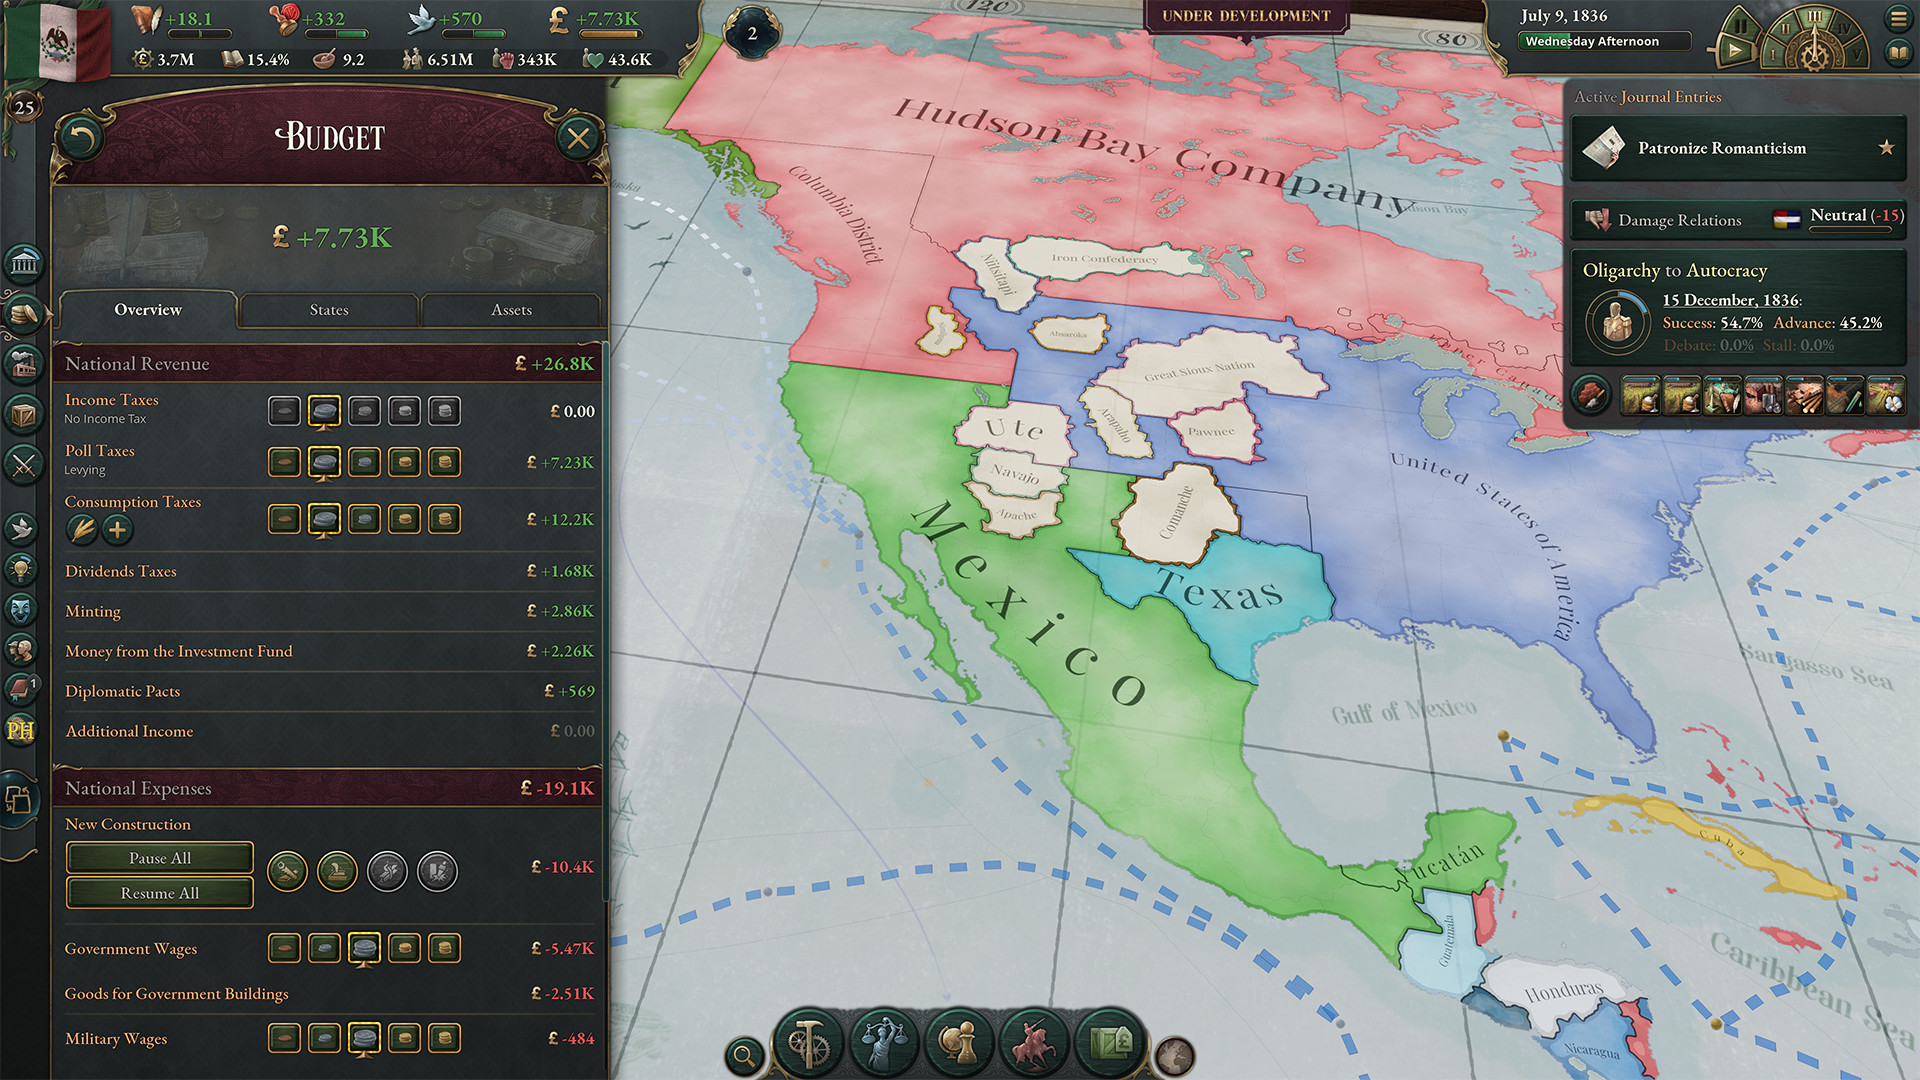 Victoria 3 standard of living explained: How to raise it?